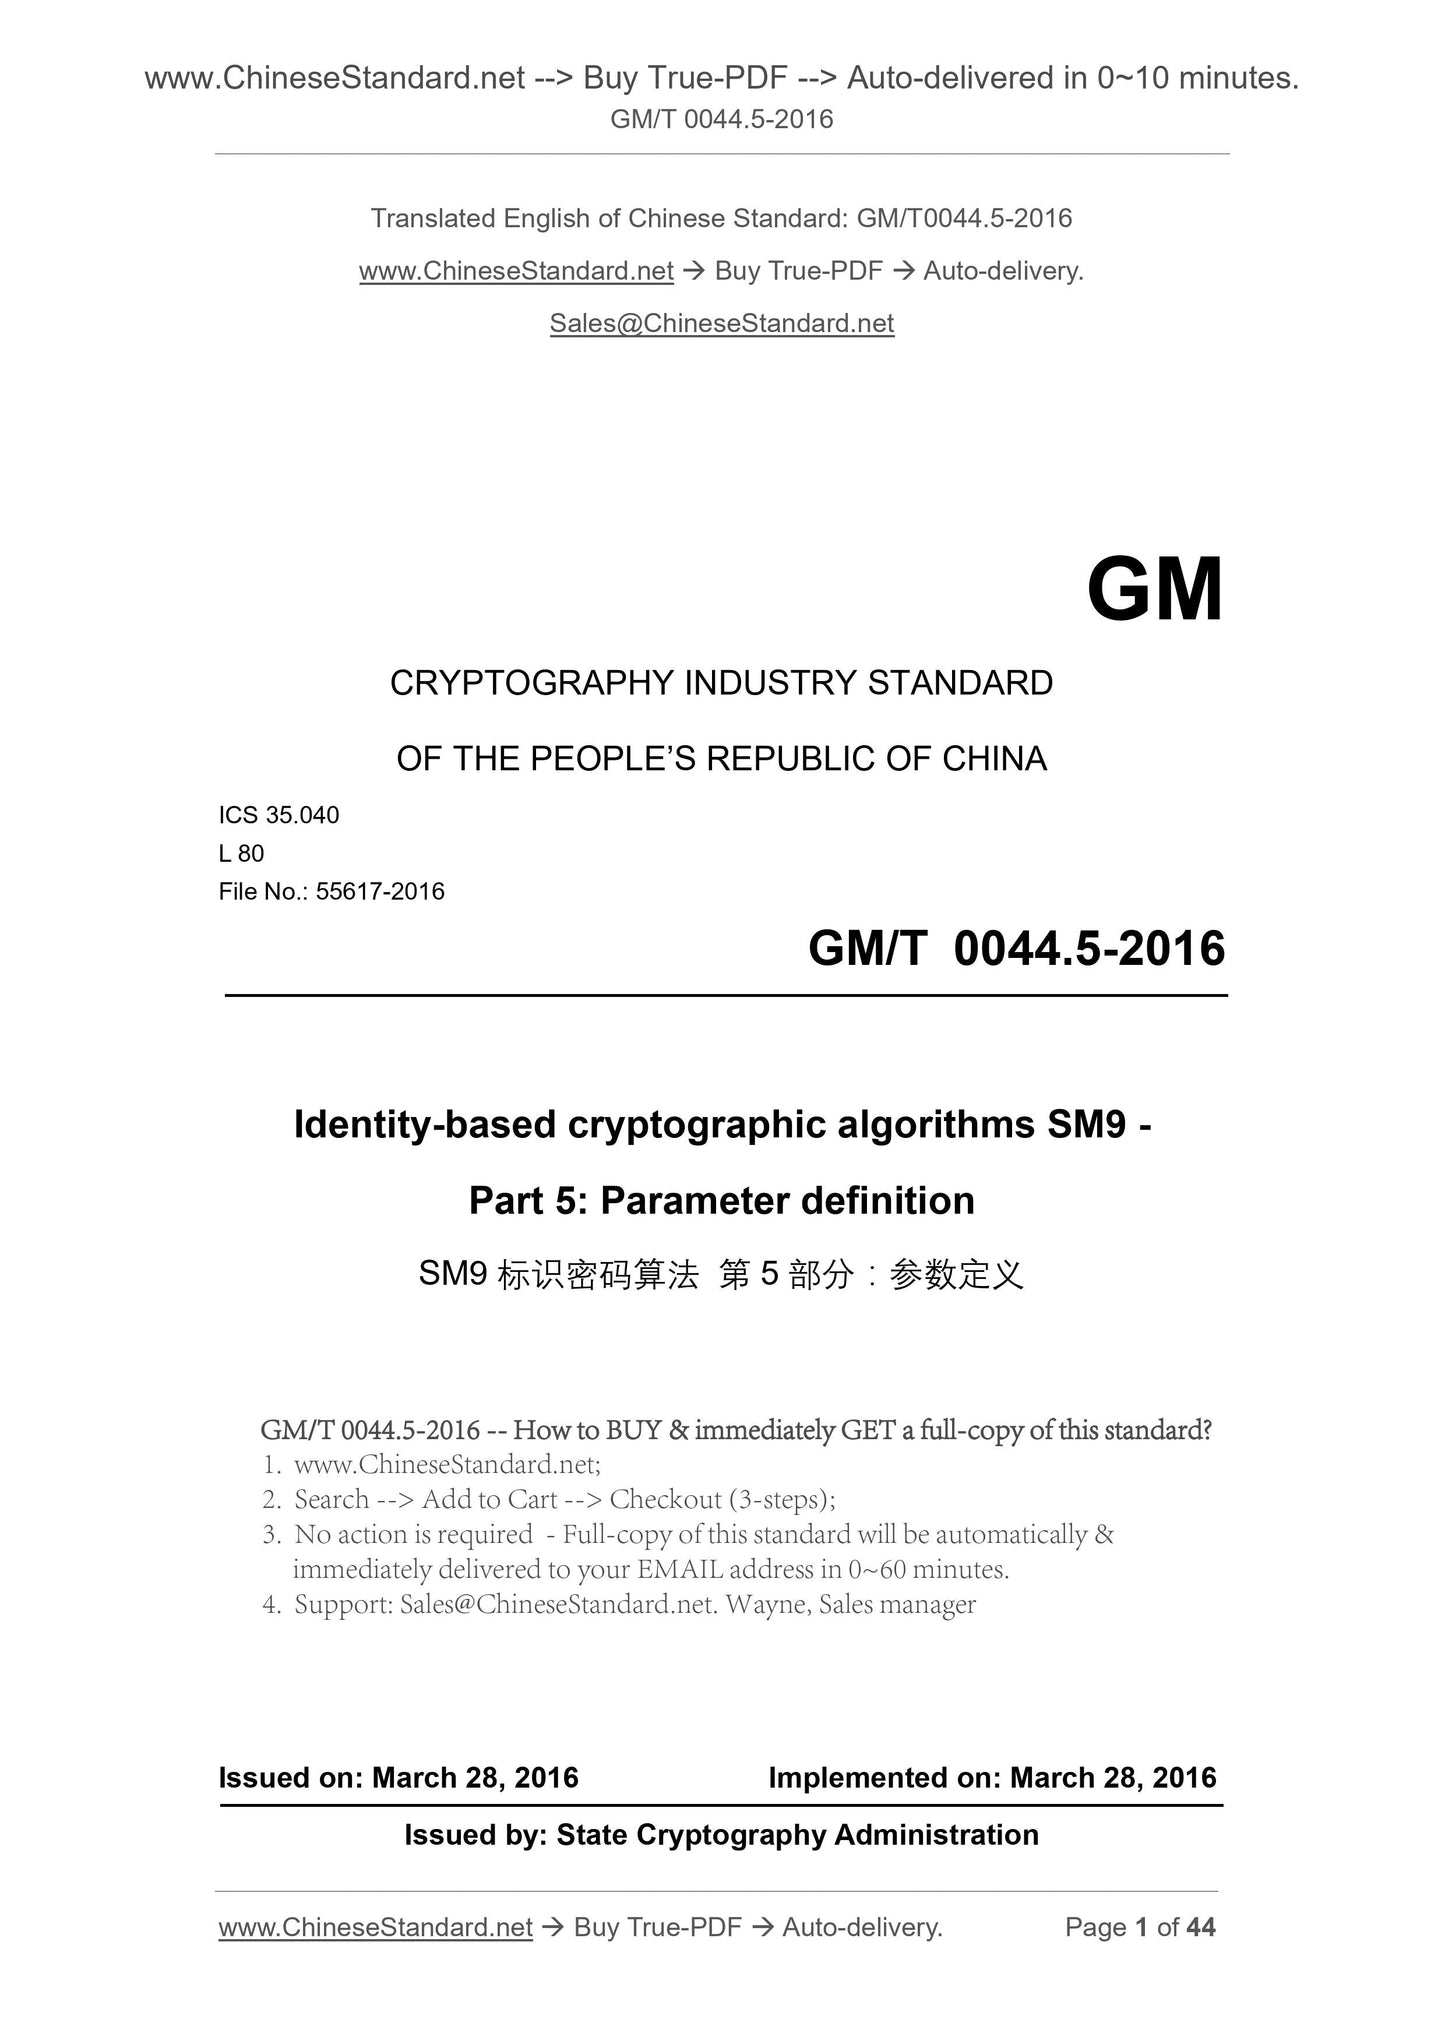 GM/T 0044.5-2016 Page 1